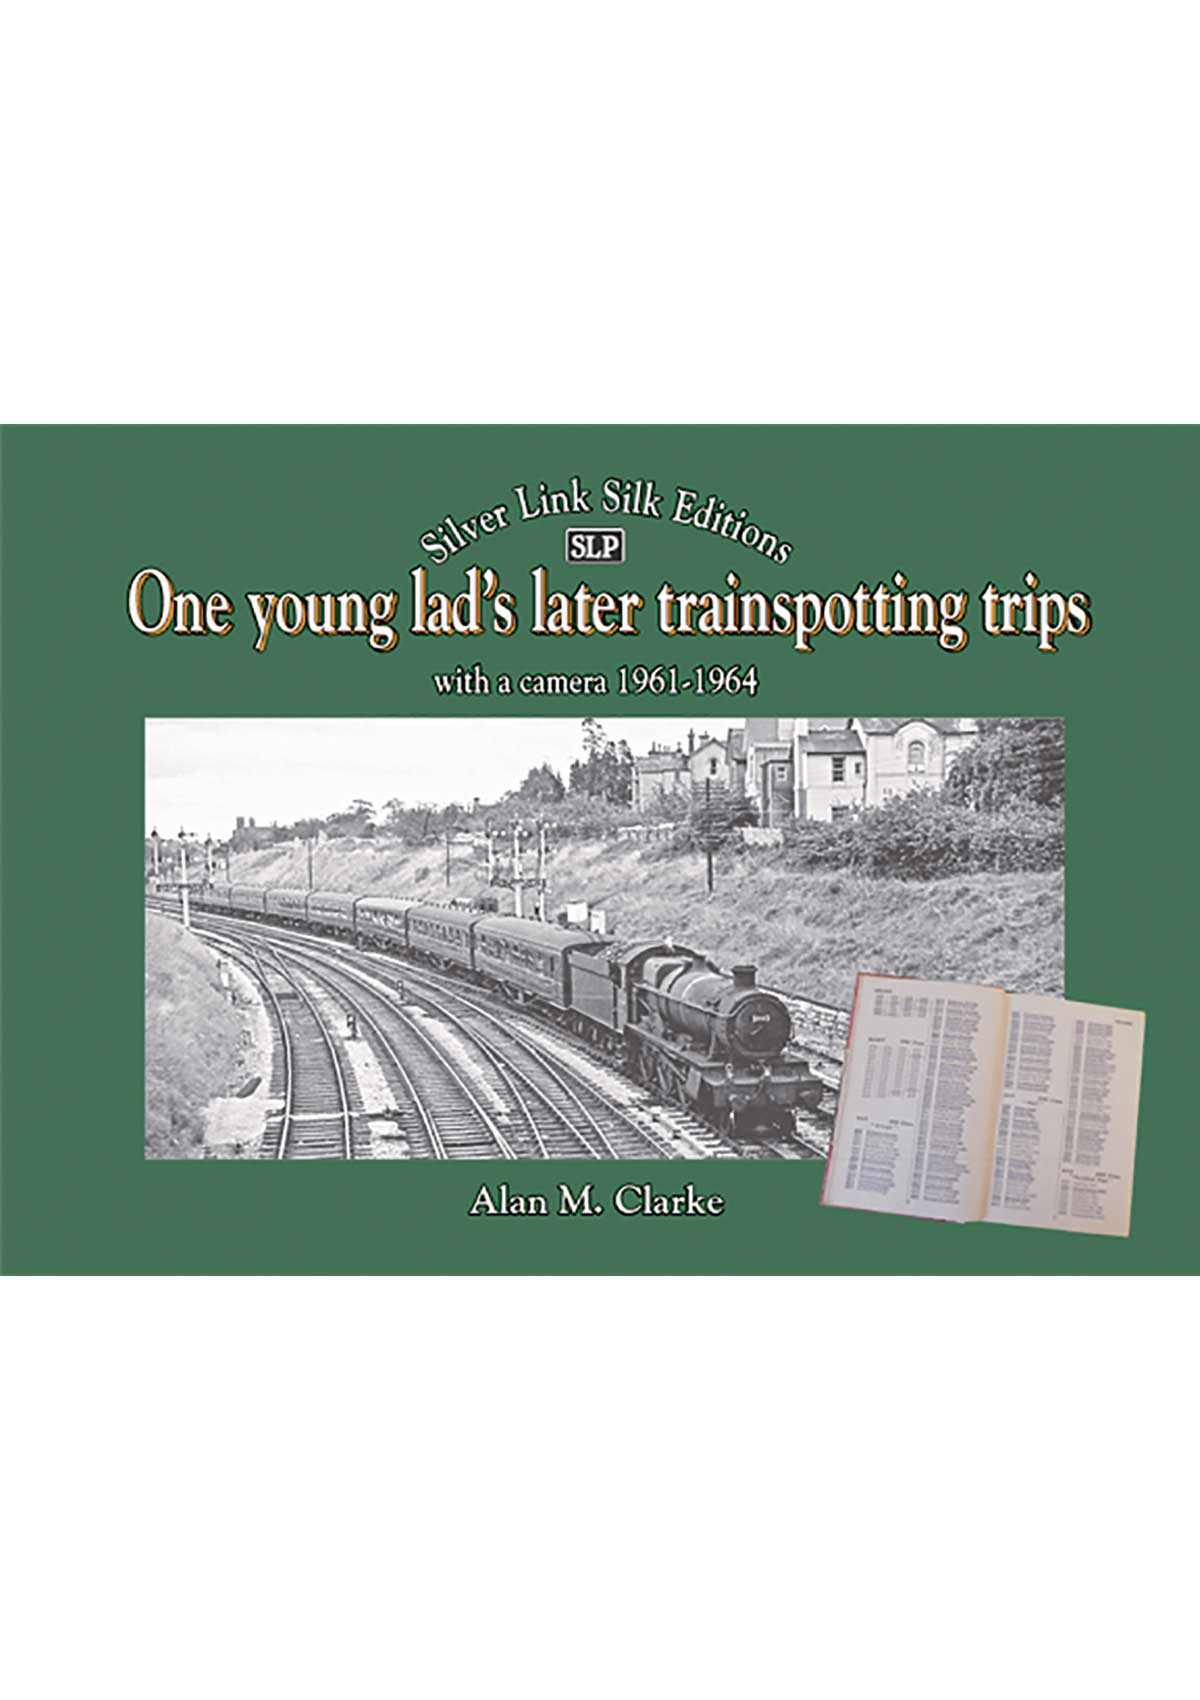 One Young Lad's Trainspotting Trips.